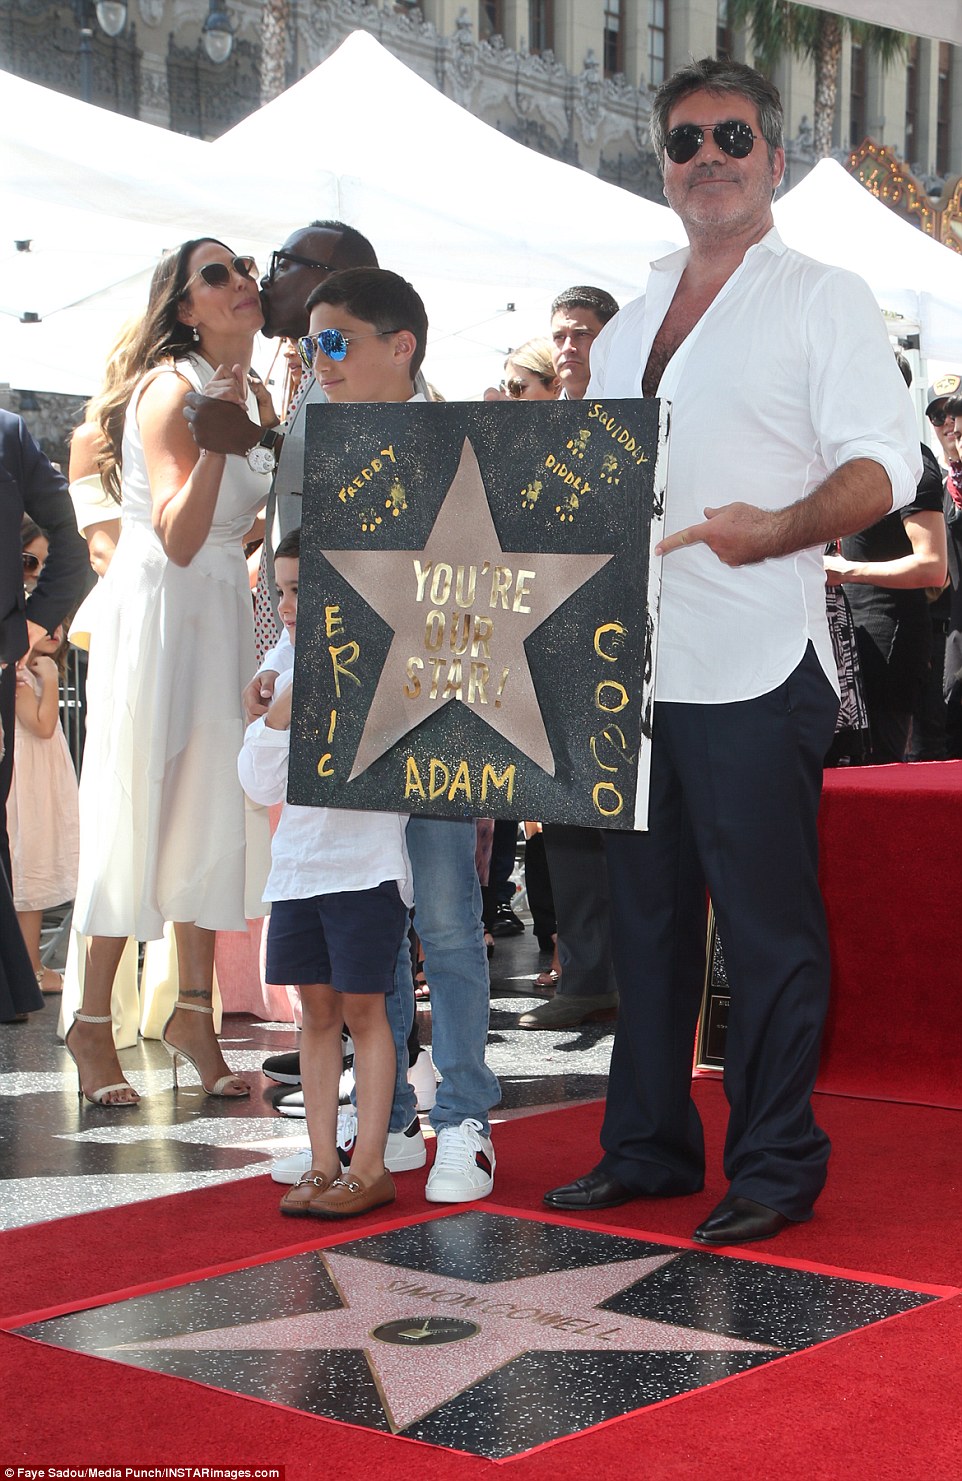 Simon Cowell receives star on Hollywood Walk of Fame